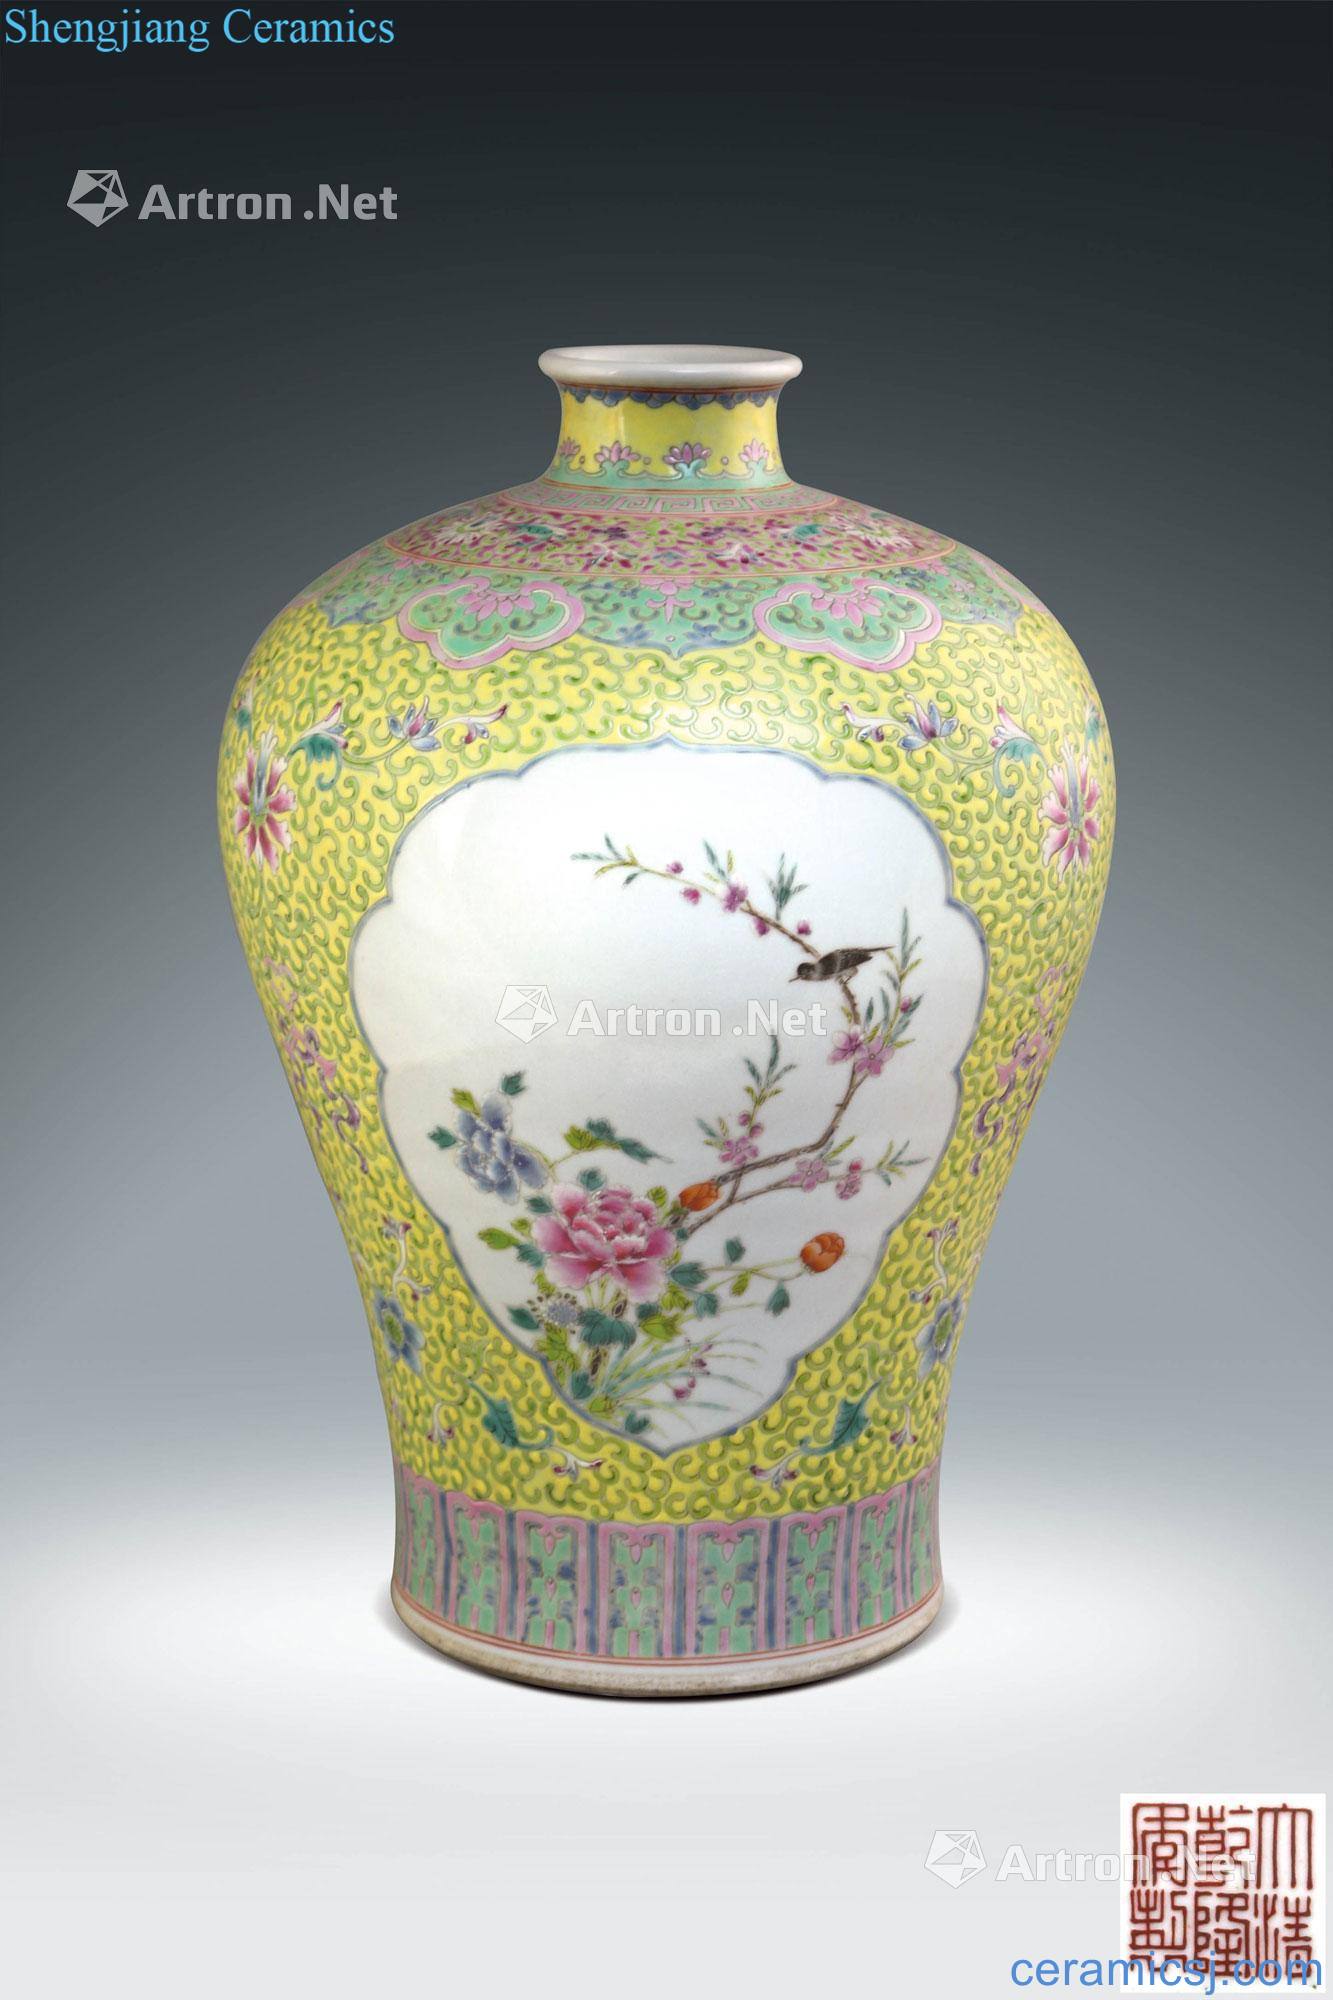 To pastel yellow flower medallion around branches of flowers and birds grain mei bottle